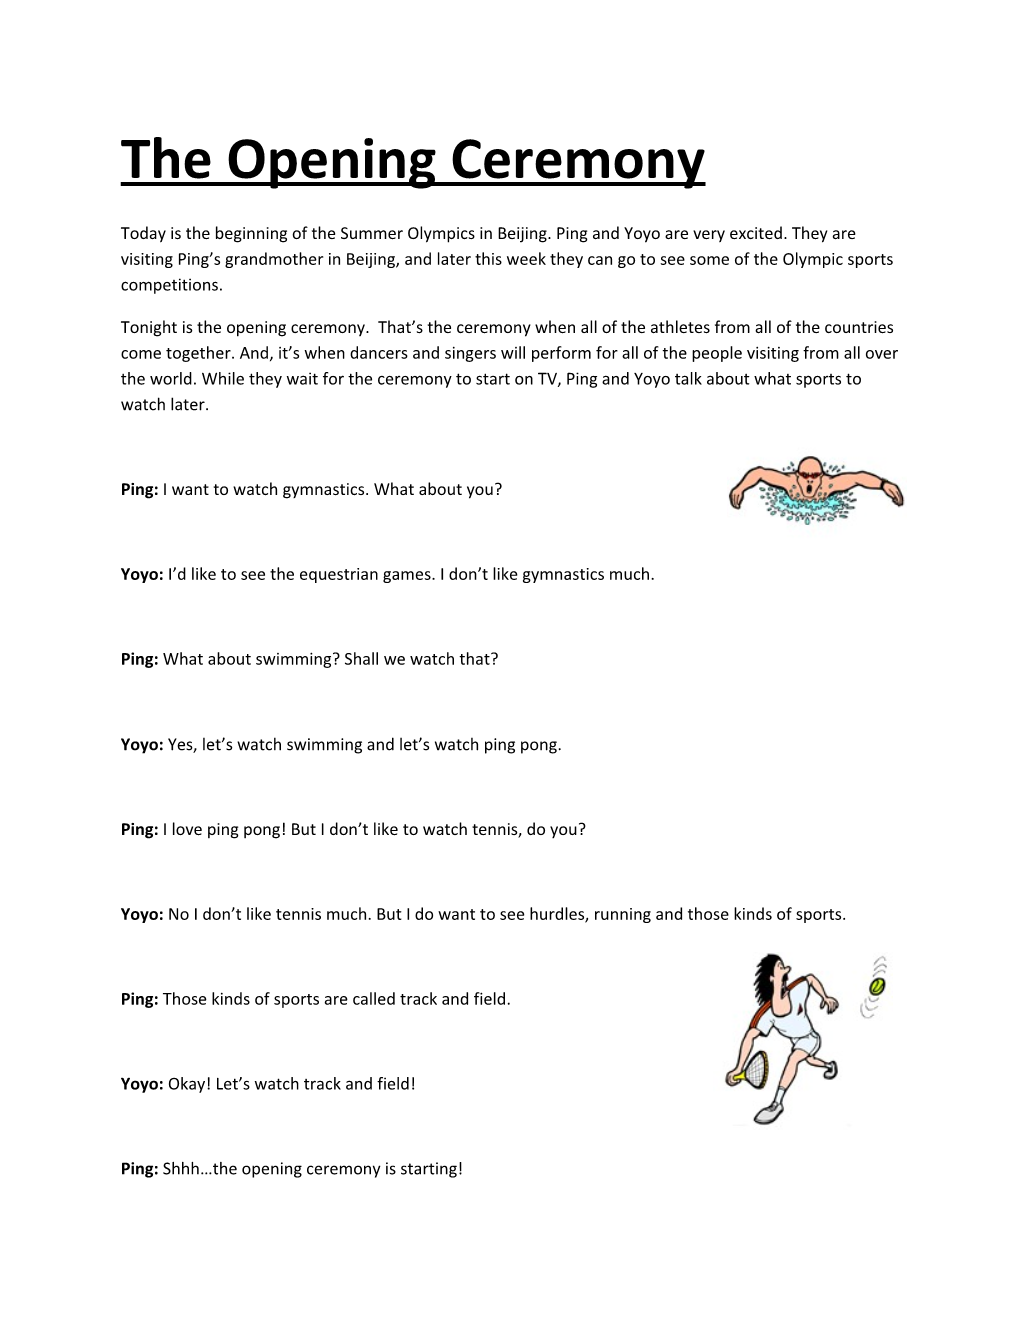 The Opening Ceremony